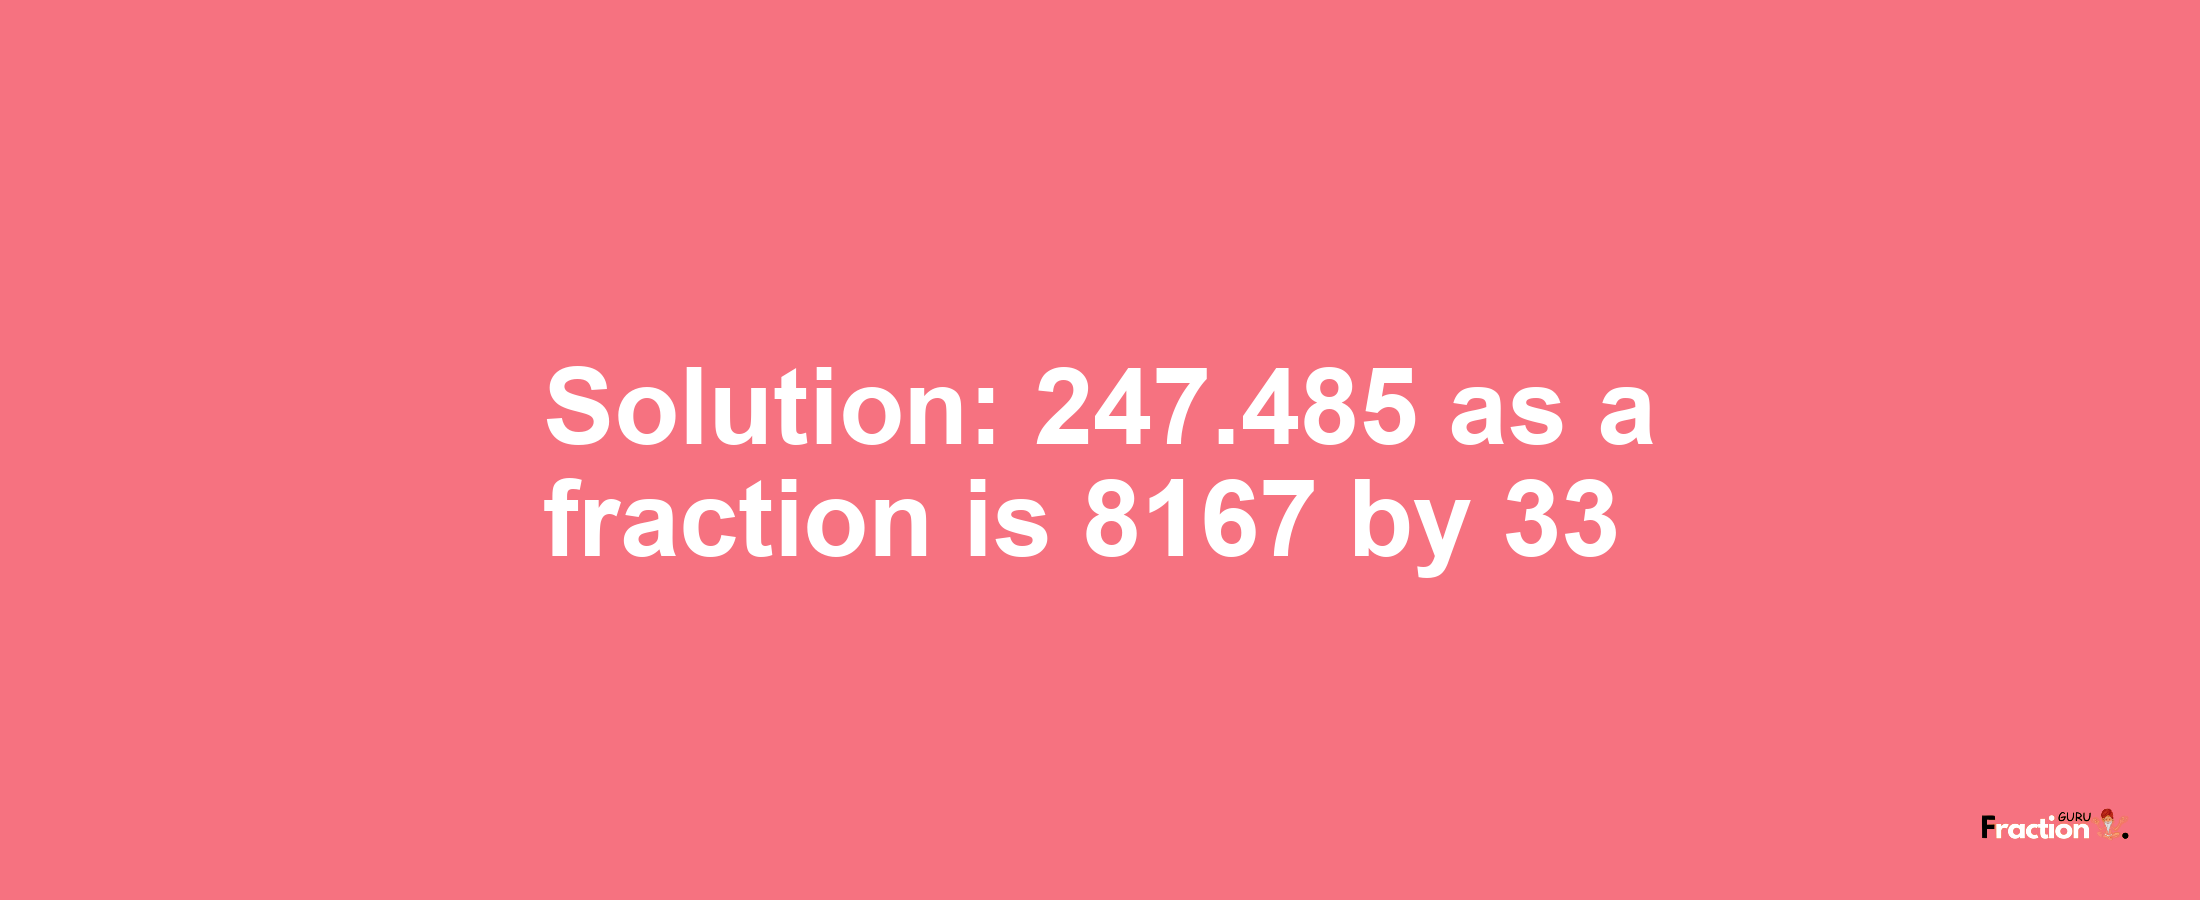 Solution:247.485 as a fraction is 8167/33